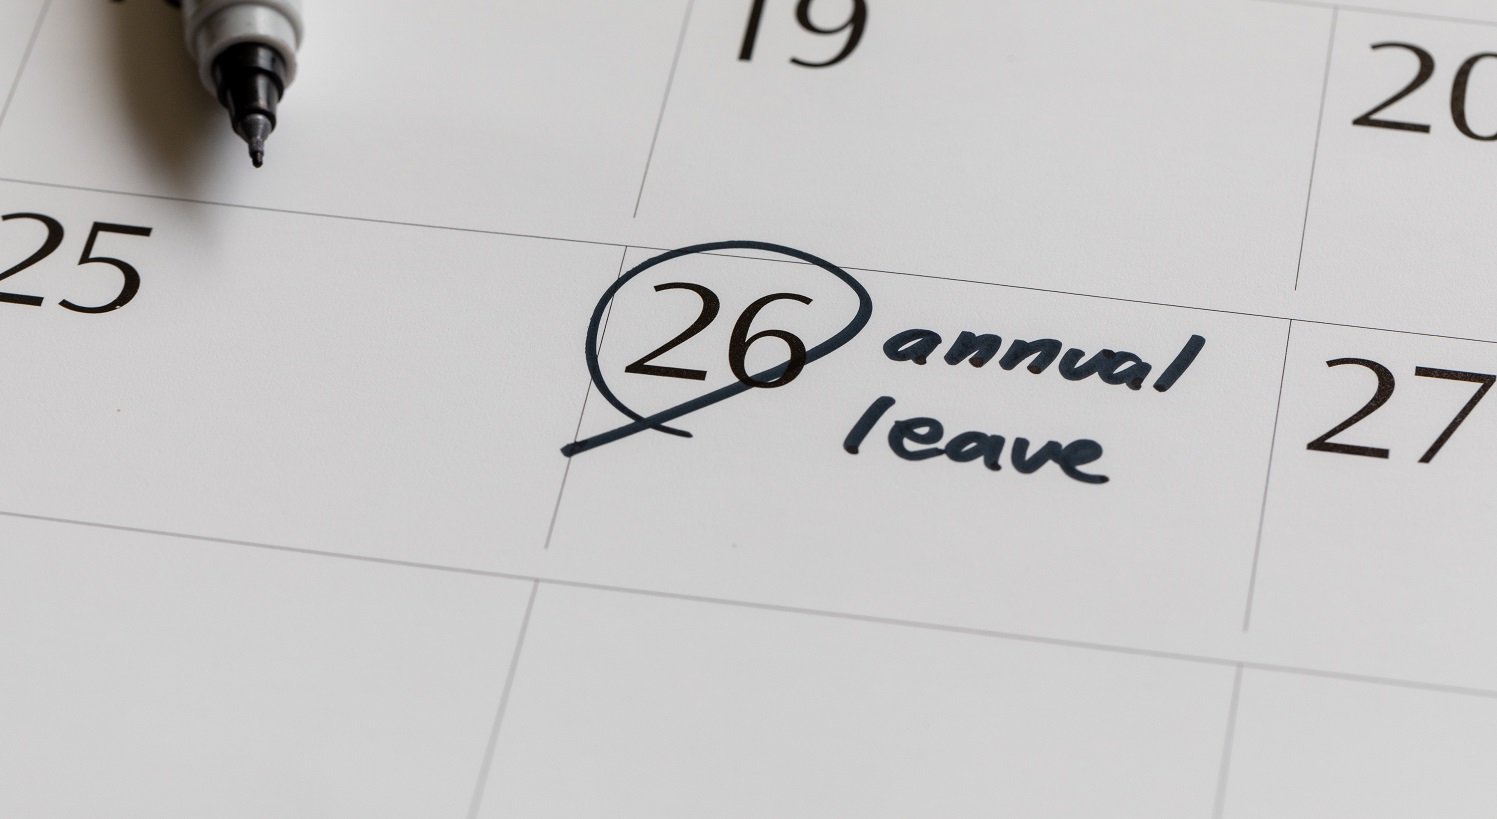 Employees right to annual leave